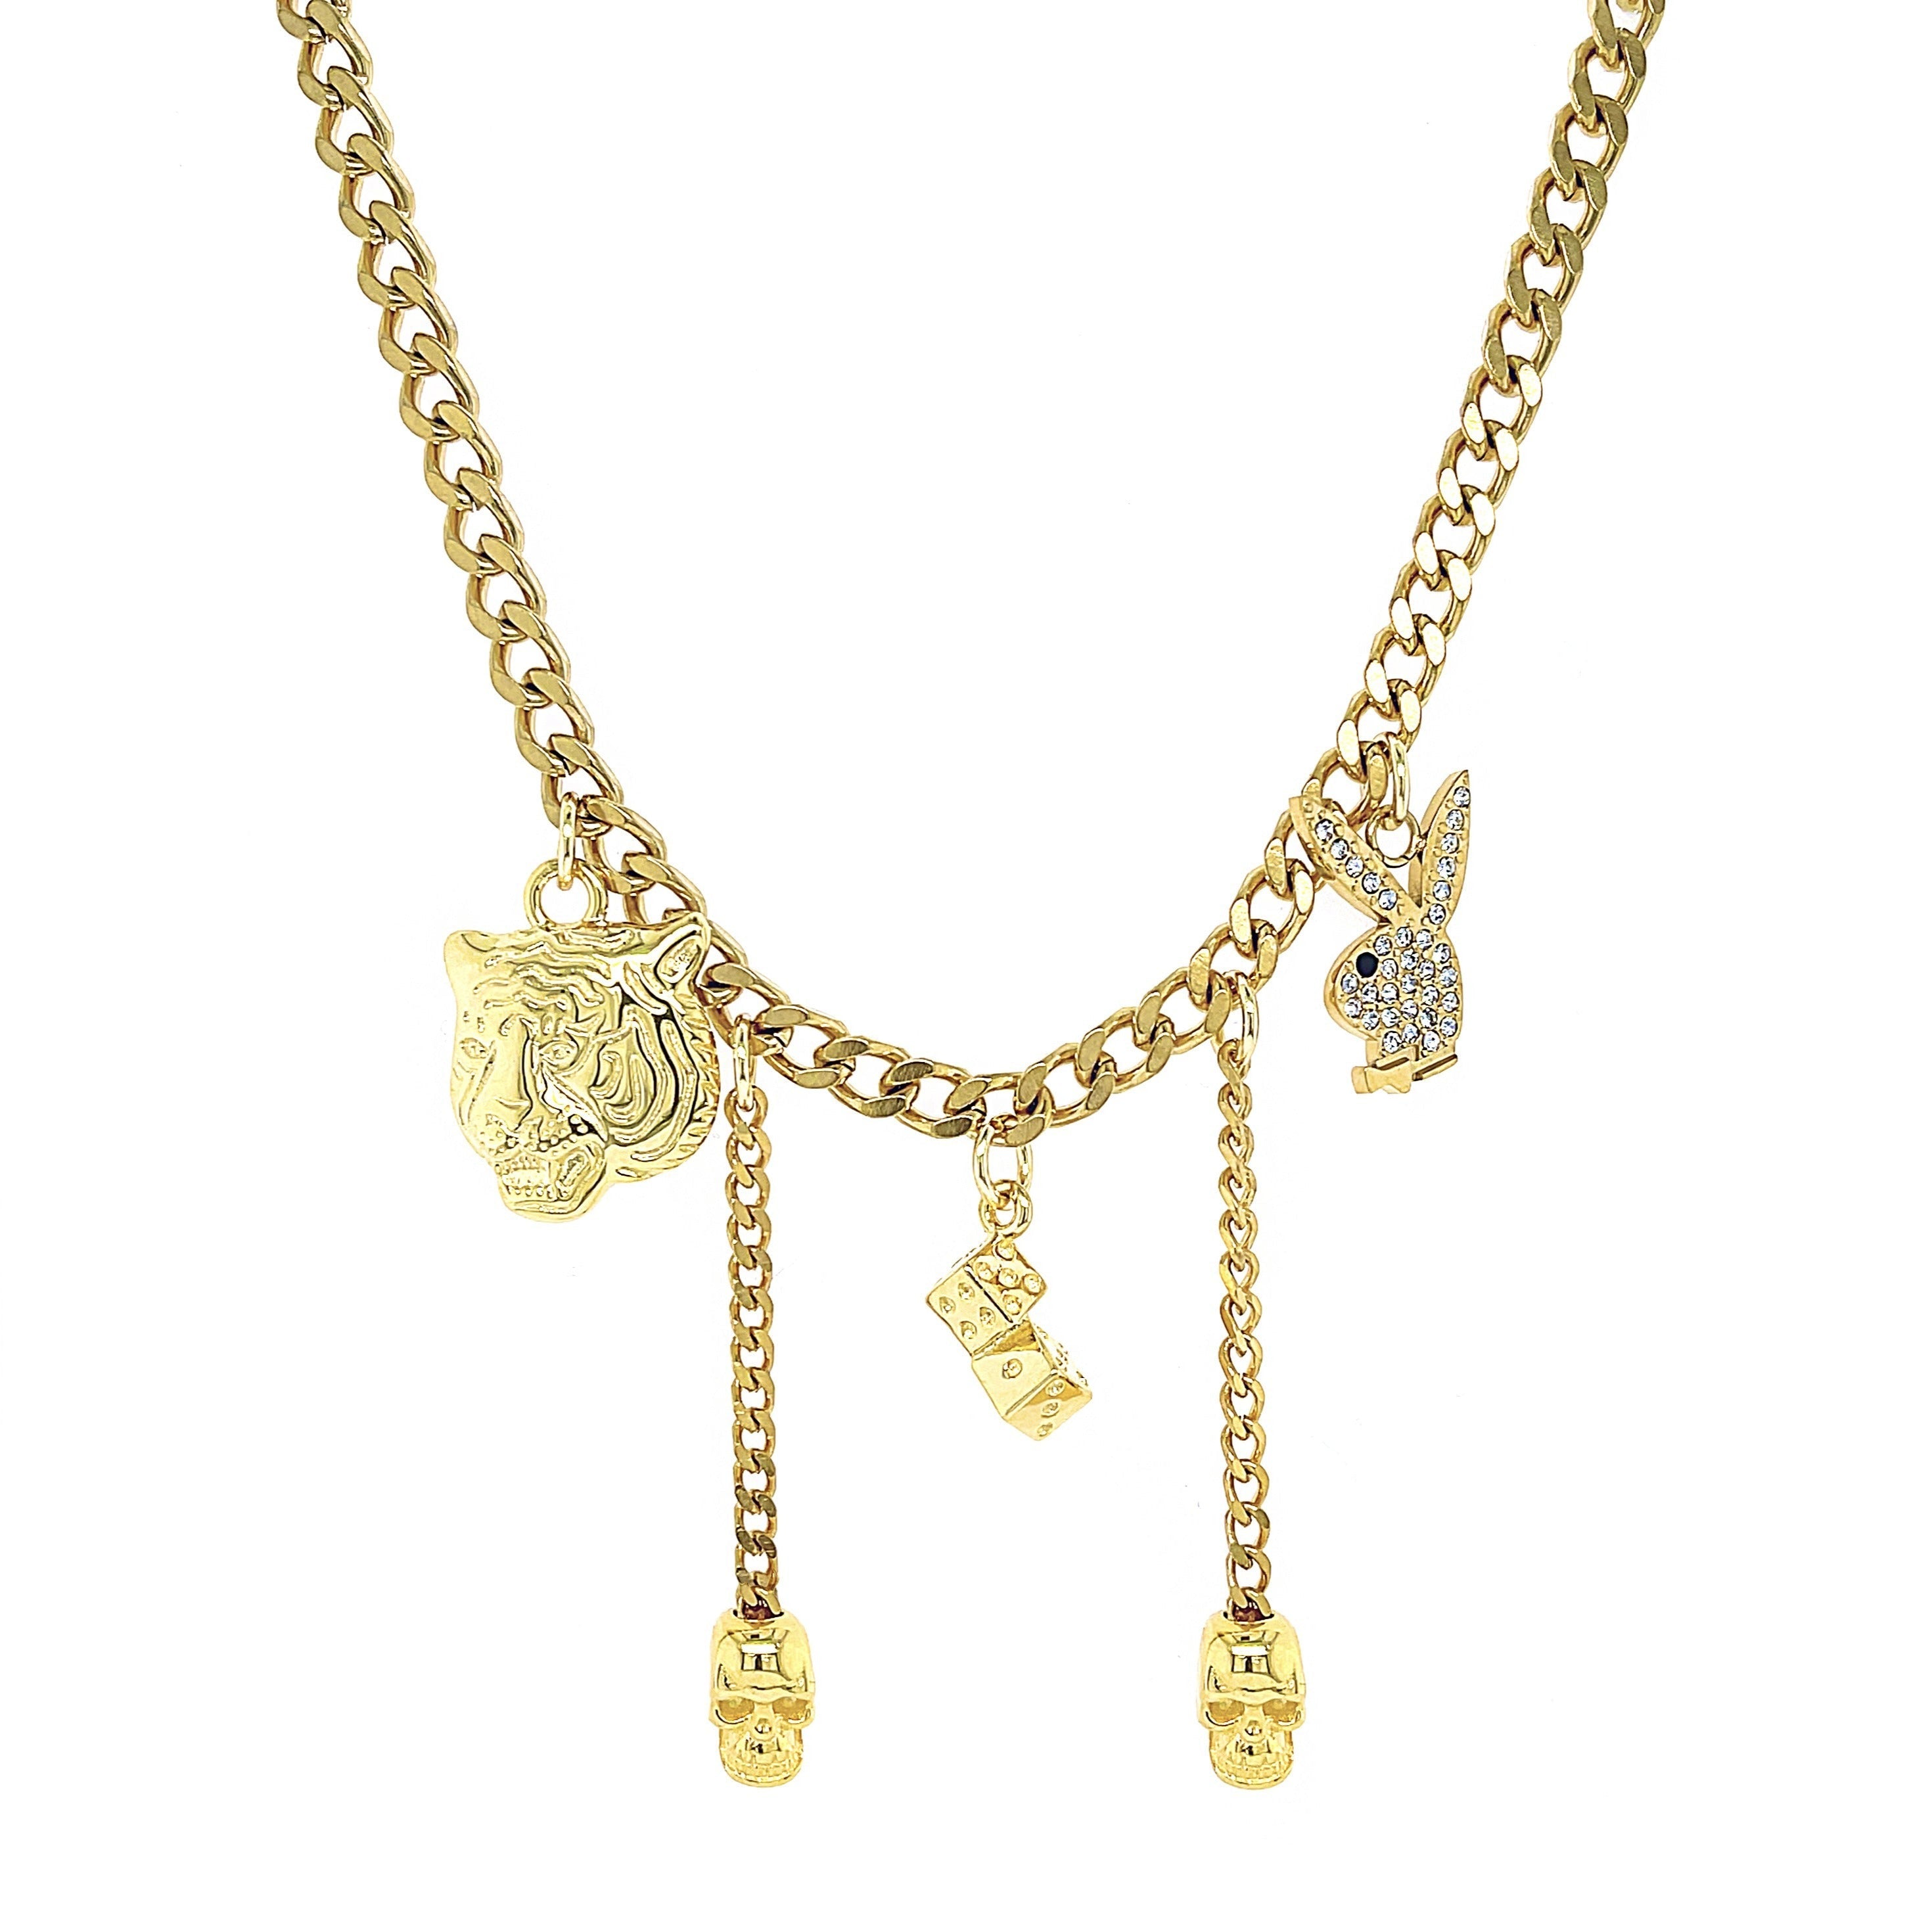 PLAYBOY MISS MONTH Gold Plated Necklaces including Diamonds Ruby's Garnets  £8.99 - PicClick UK